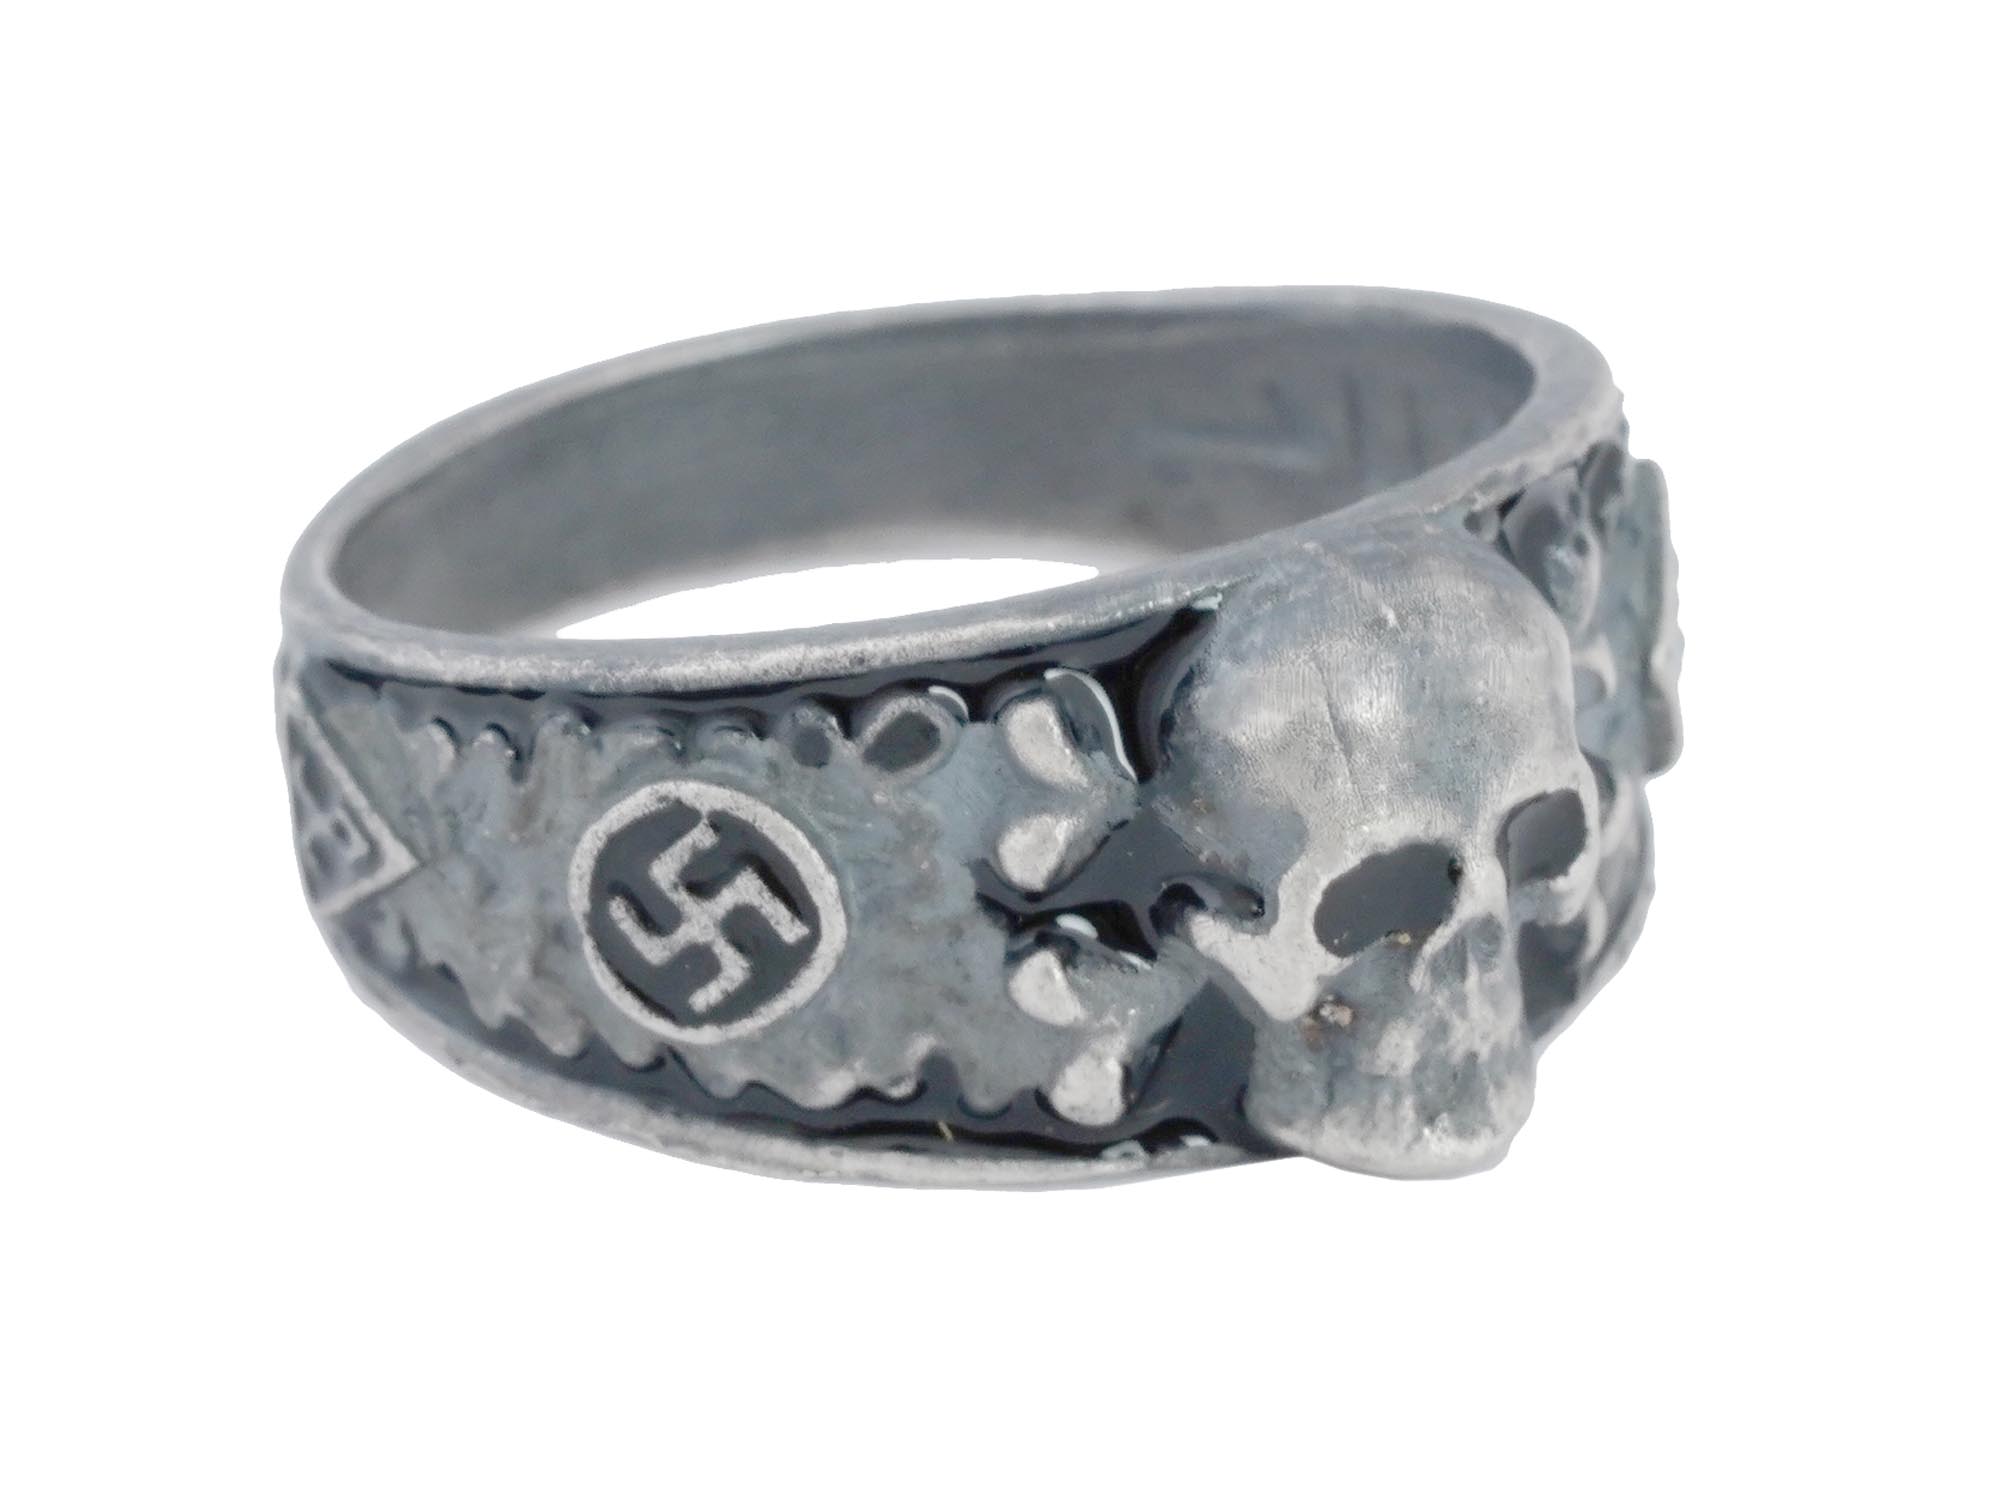 GERMAN WWII SS SECRET SOCIETY AHNENERBE SILVER RING PIC-1